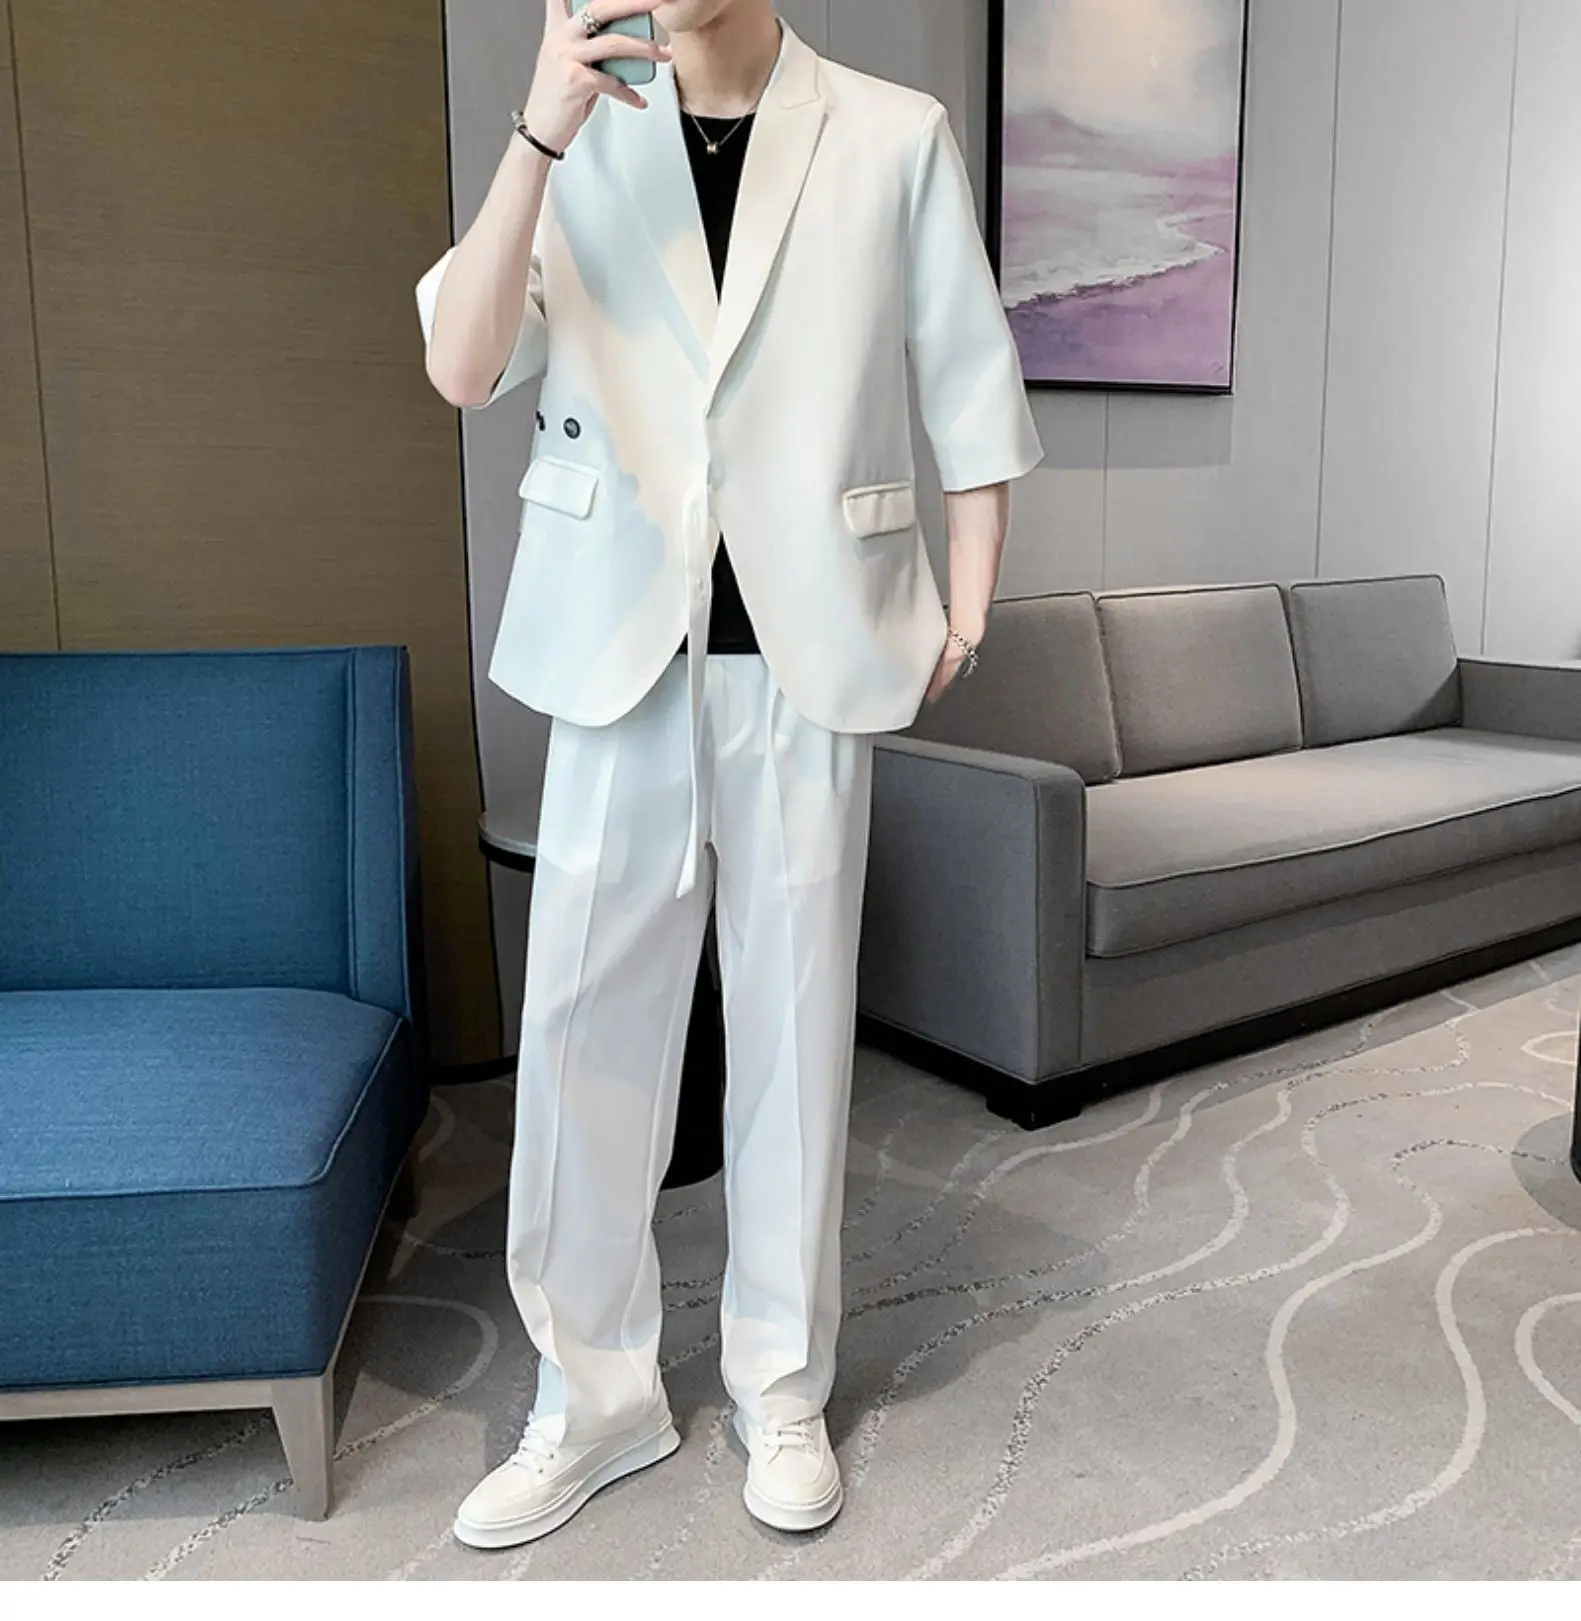 2022 New Men's Suit Oversize Fashion Style Sagging Young Handsome Relaxed Clothes Male Summer Mid-Short Costumes